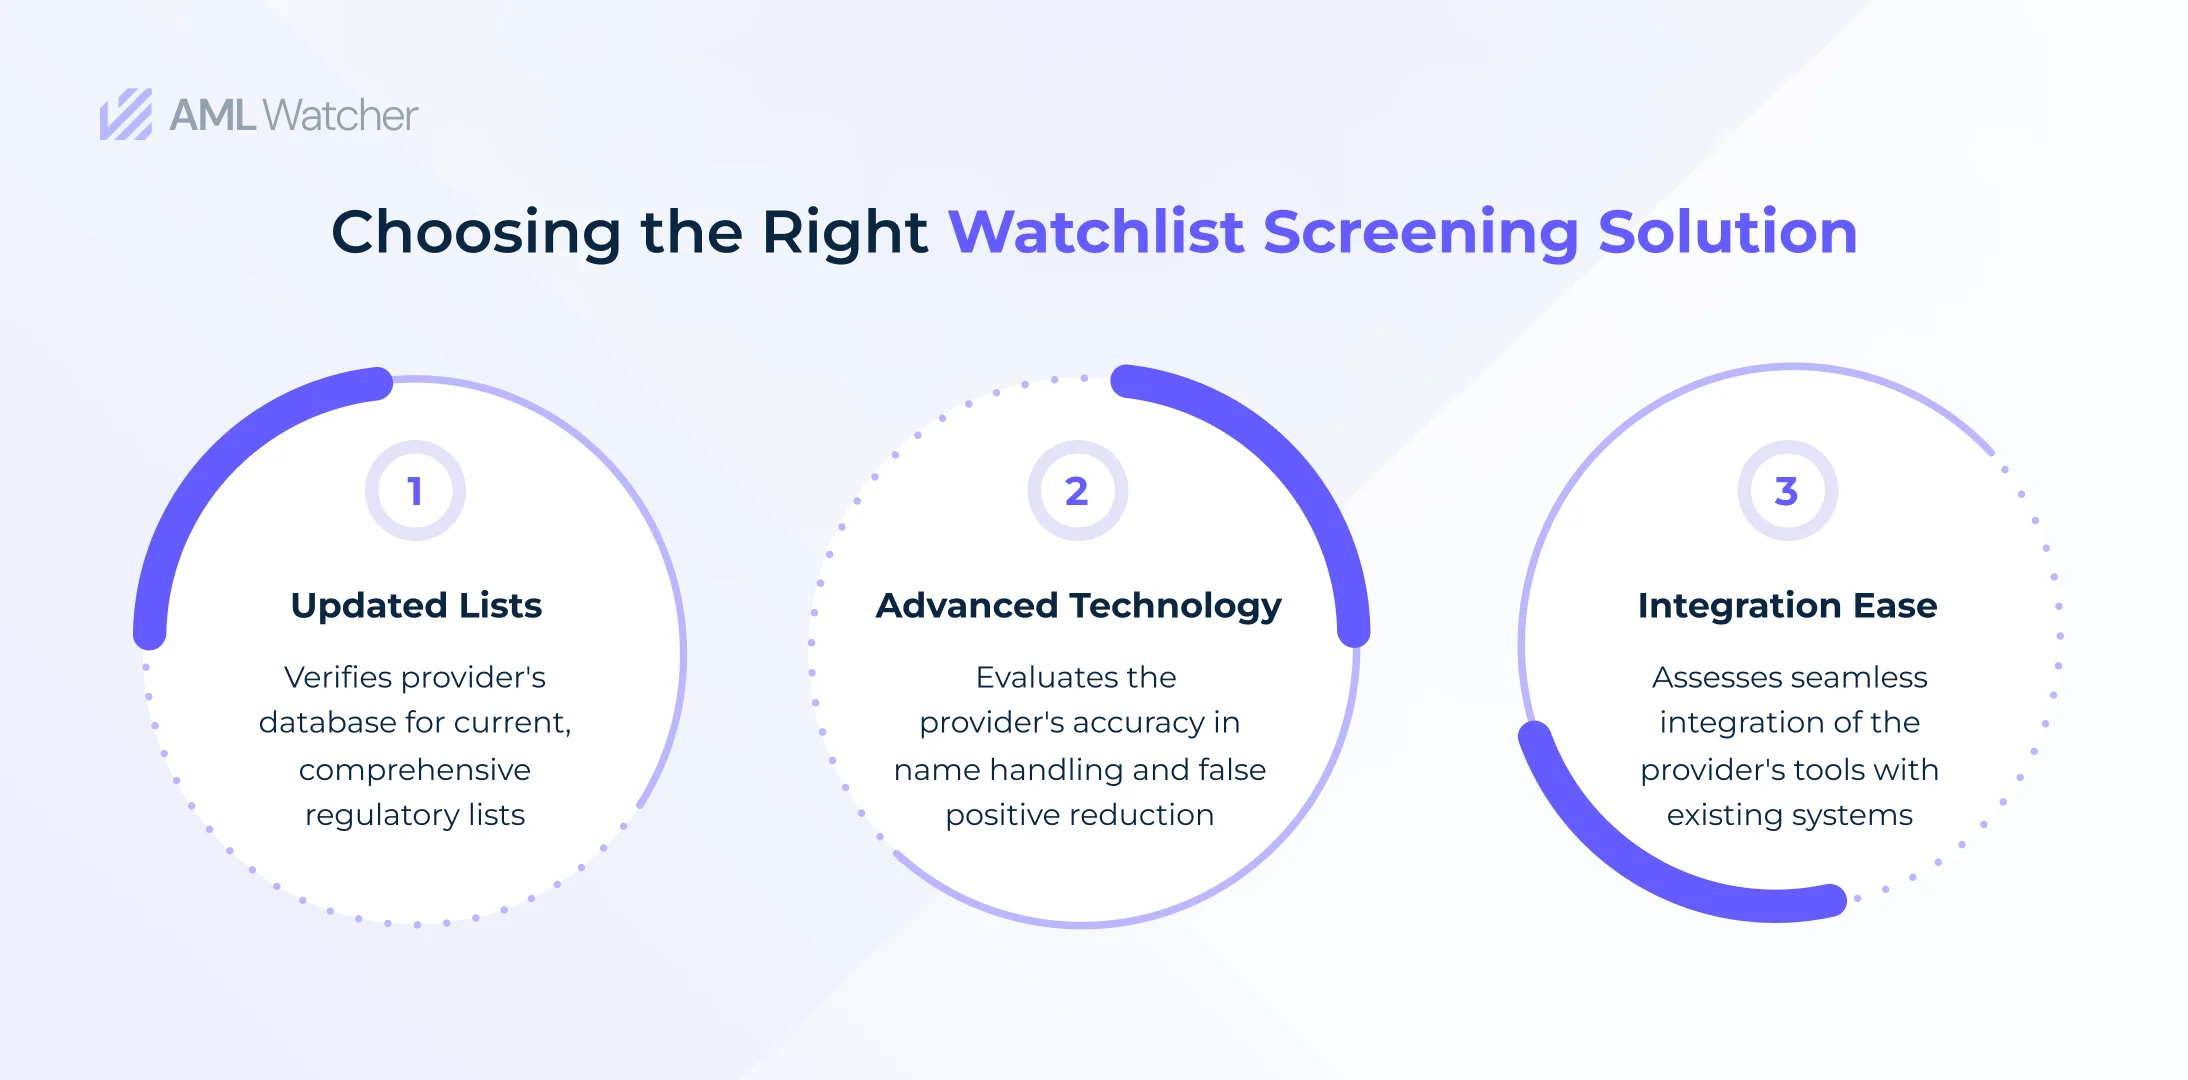 When selecting a watchlist screening provider, it is extremely essential to consider several key factors to ensure security. 